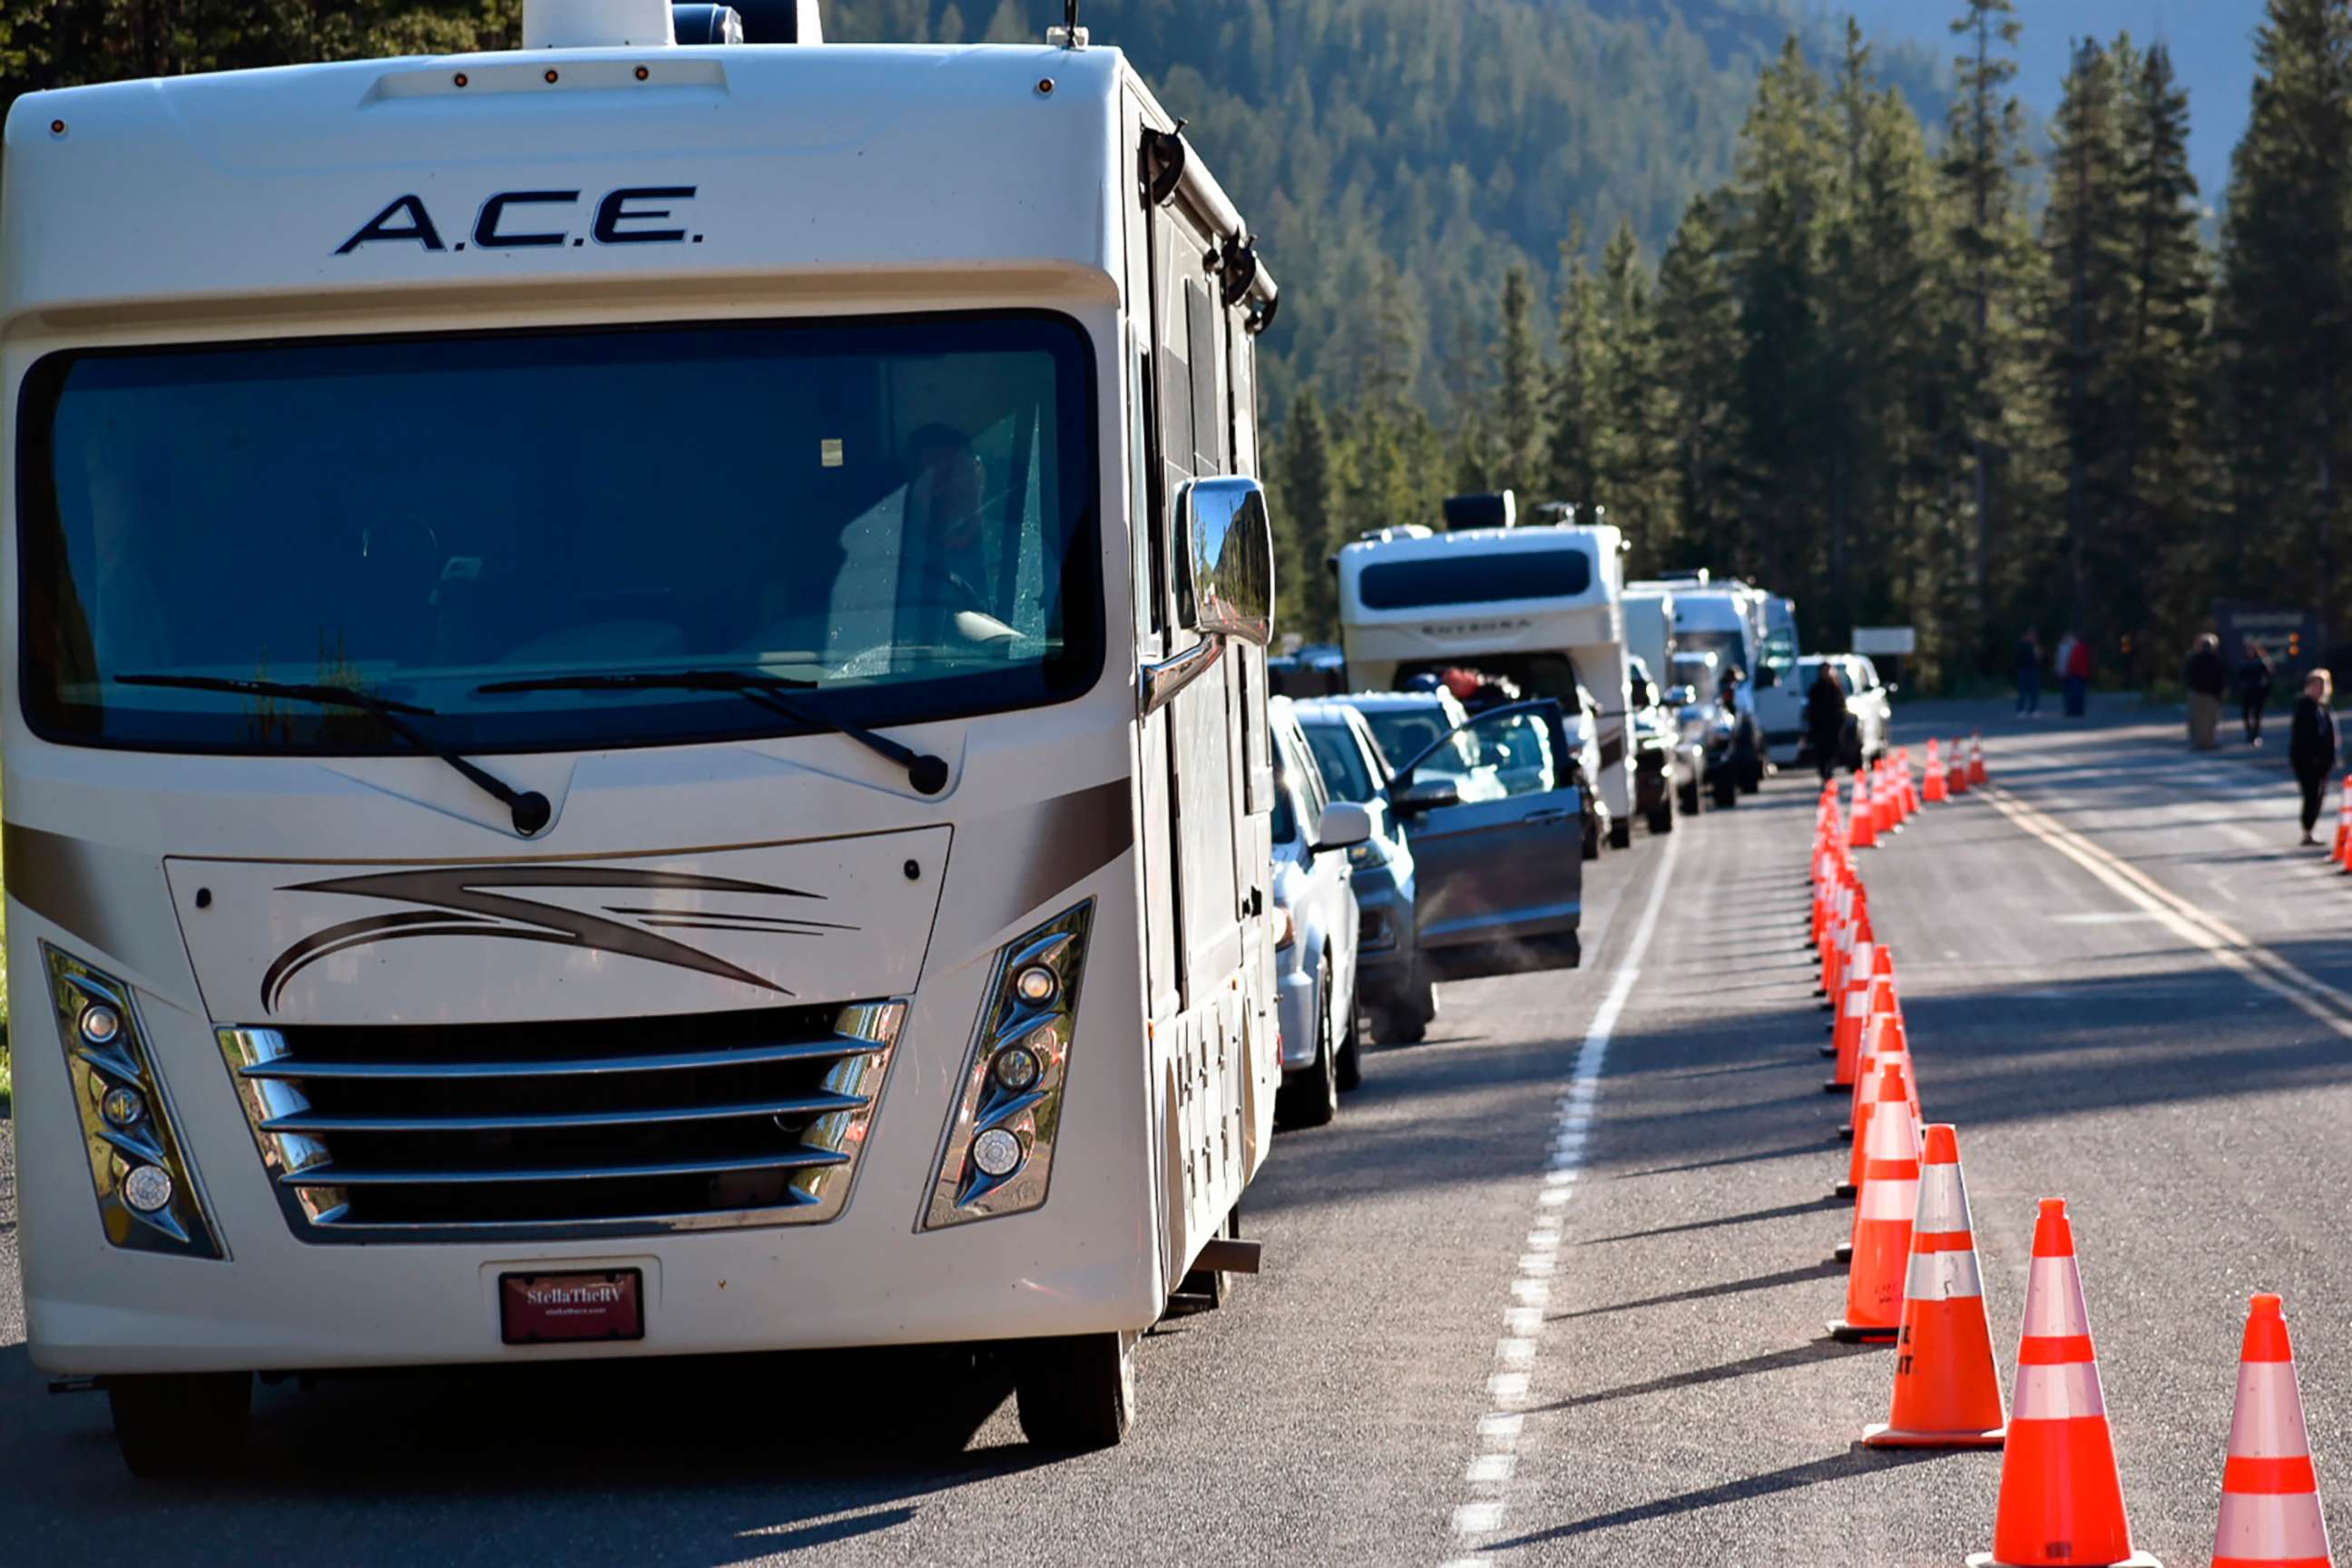 PHOTO: Dozens of vehicles lined up outside Yellowstone National Park's entrance, June 22, 2022, near Wapiti Wyo. The park is partially reopening after being forced to close last week when record flooding caused widespread damage.